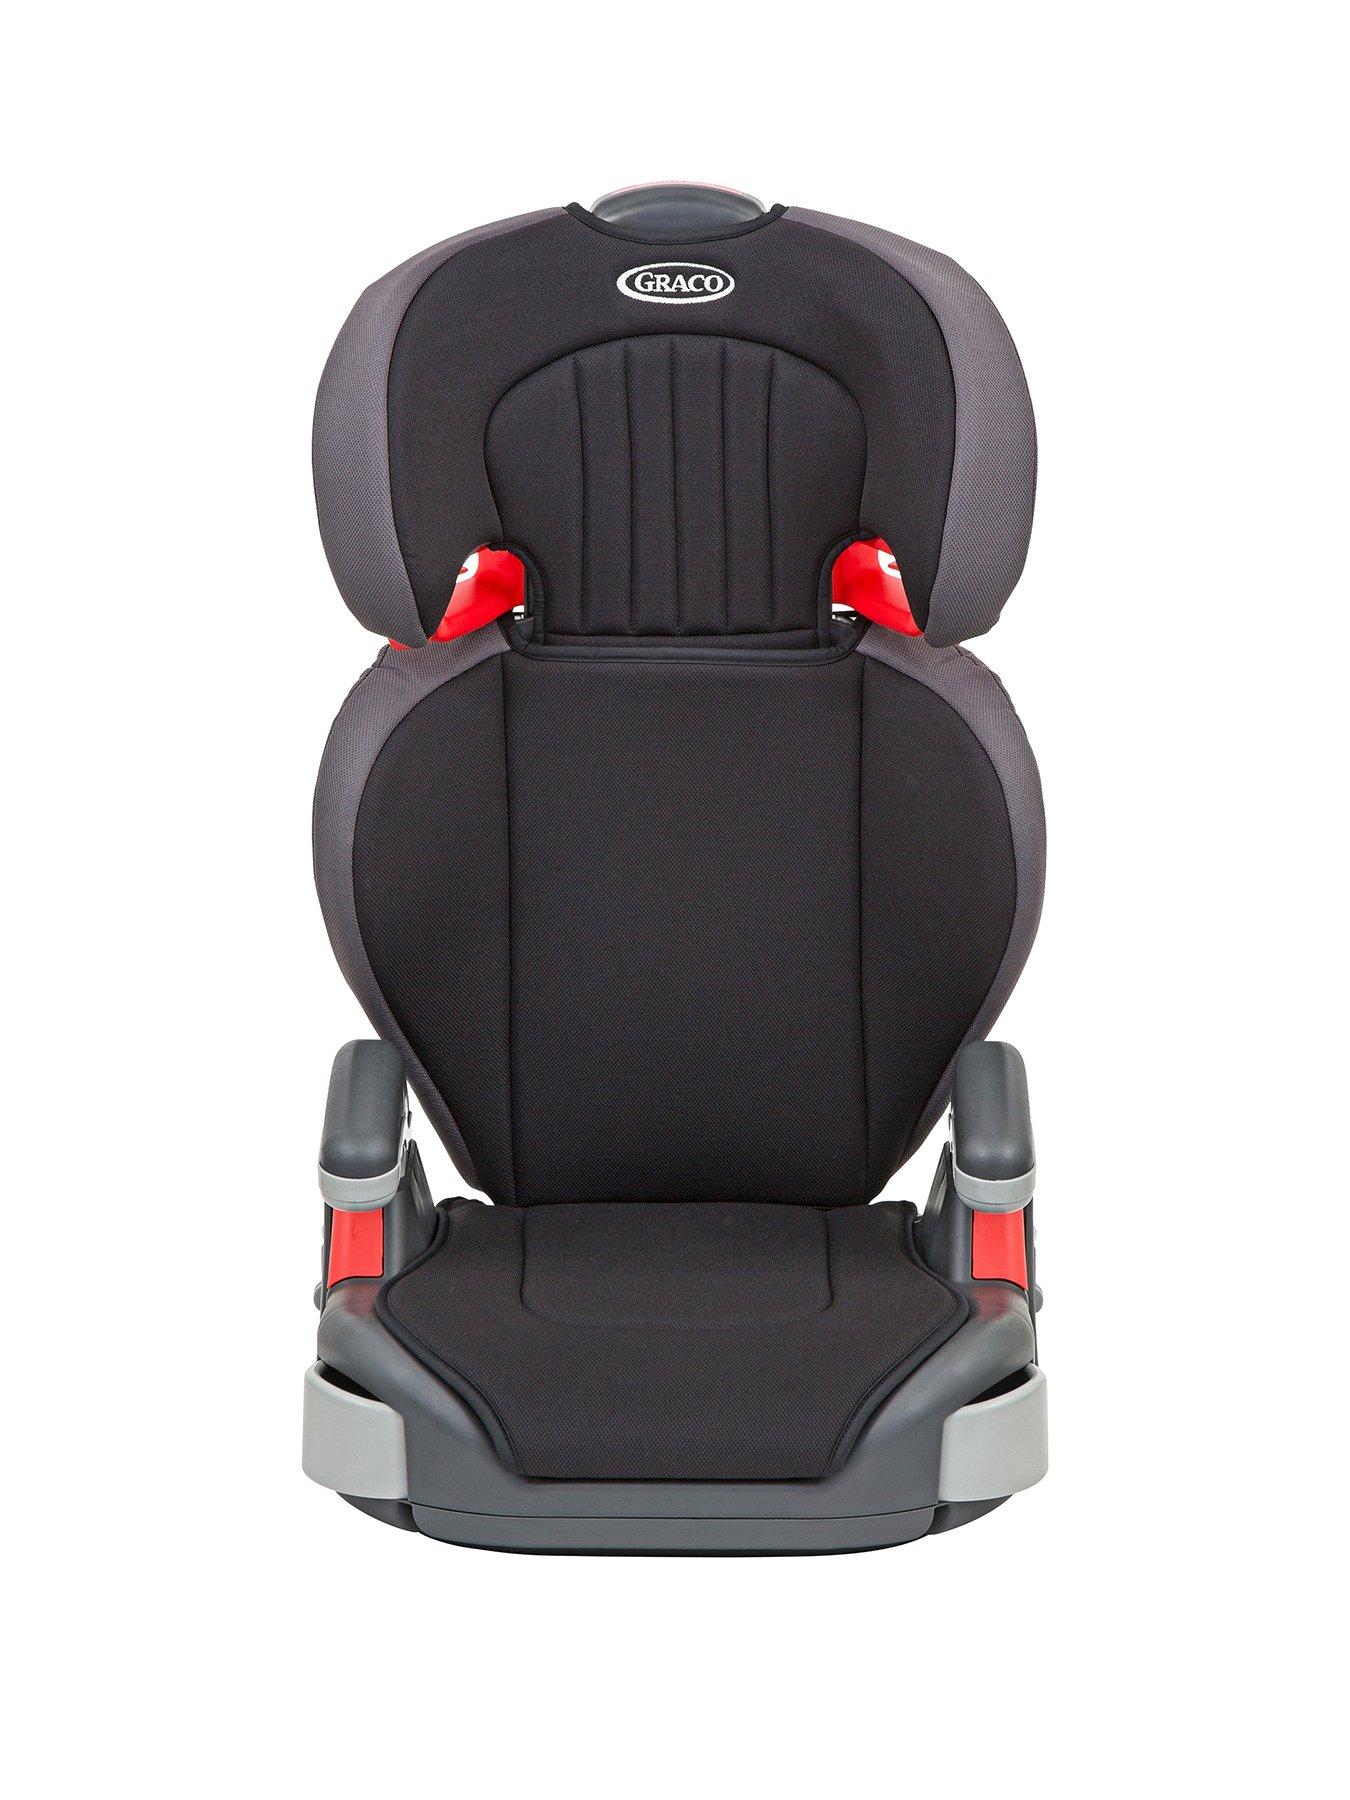 Child Car Seat Graco Affix Highback Booster Isofix Latch System 4-12 Years Old 